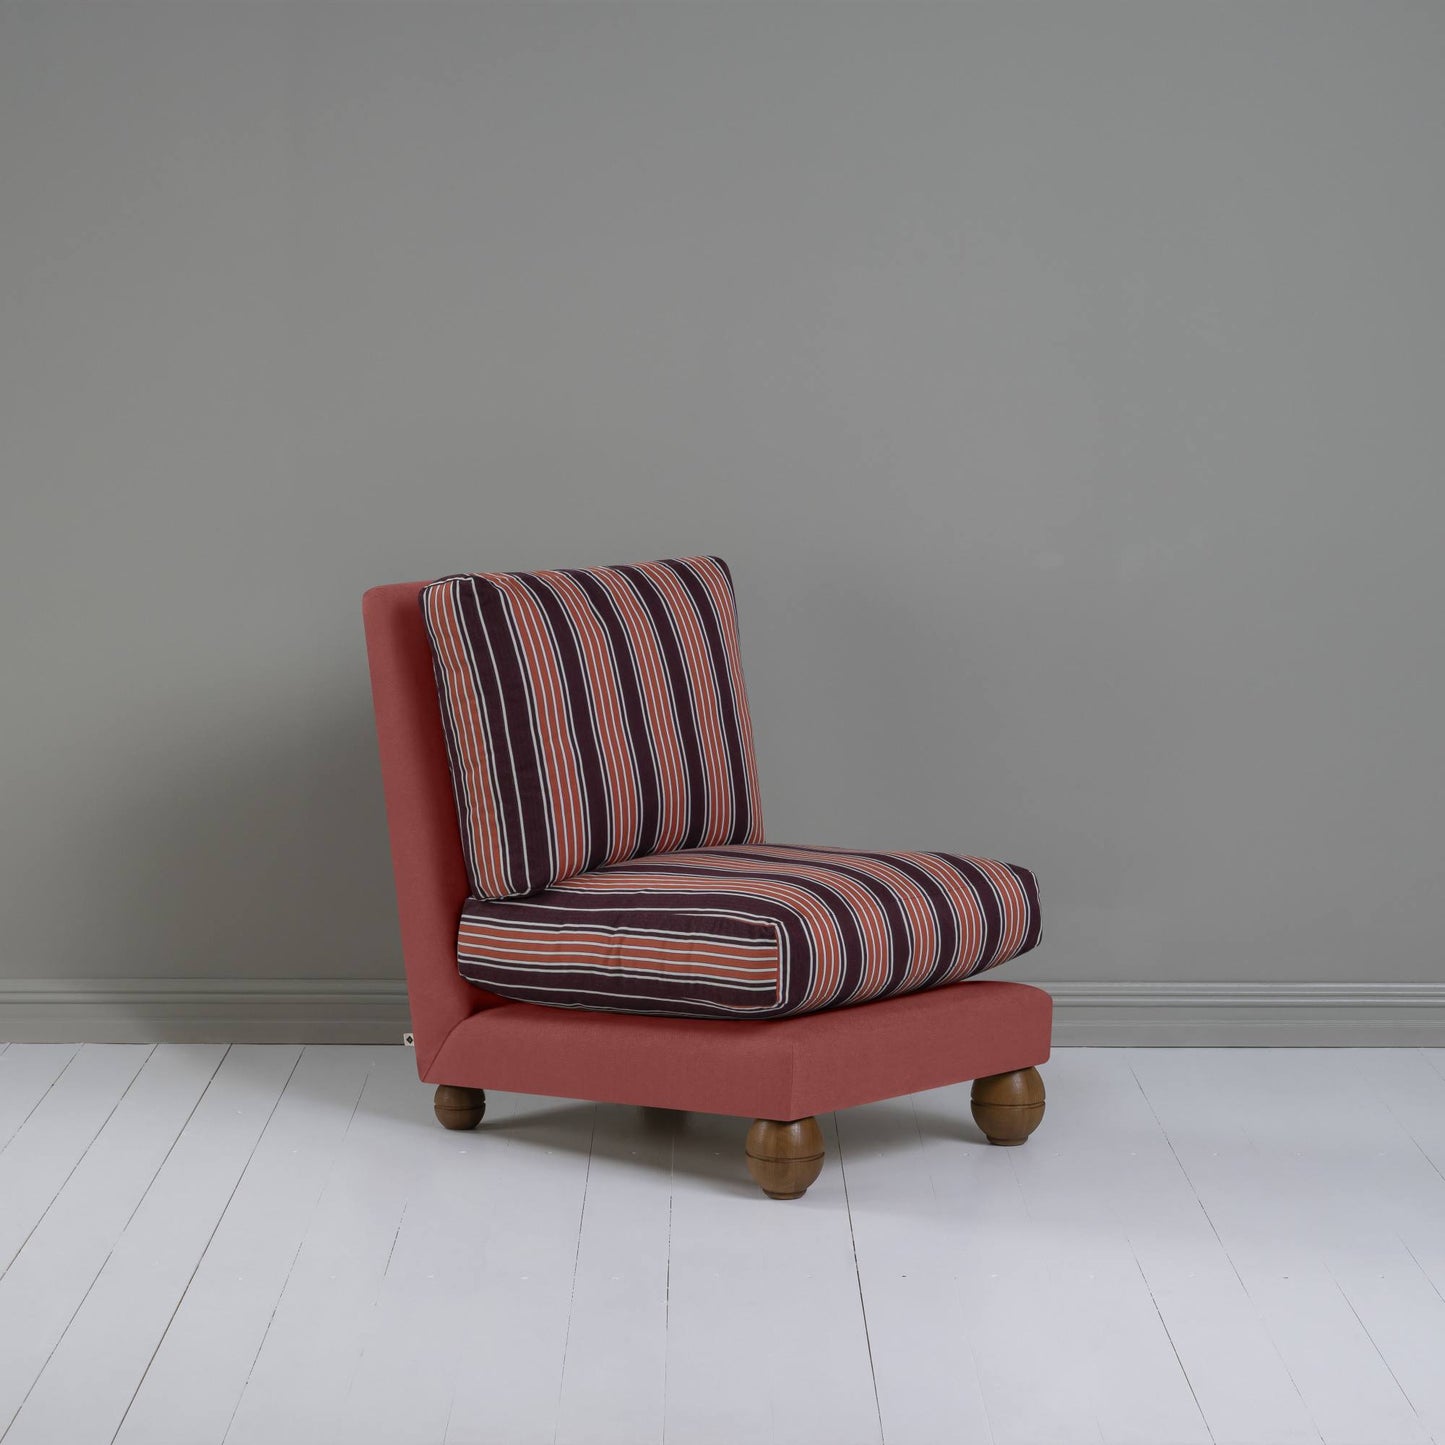 Perch Slipper Armchair in Laidback Linen Rouge Frame, with Regatta Cotton, Flame Seat